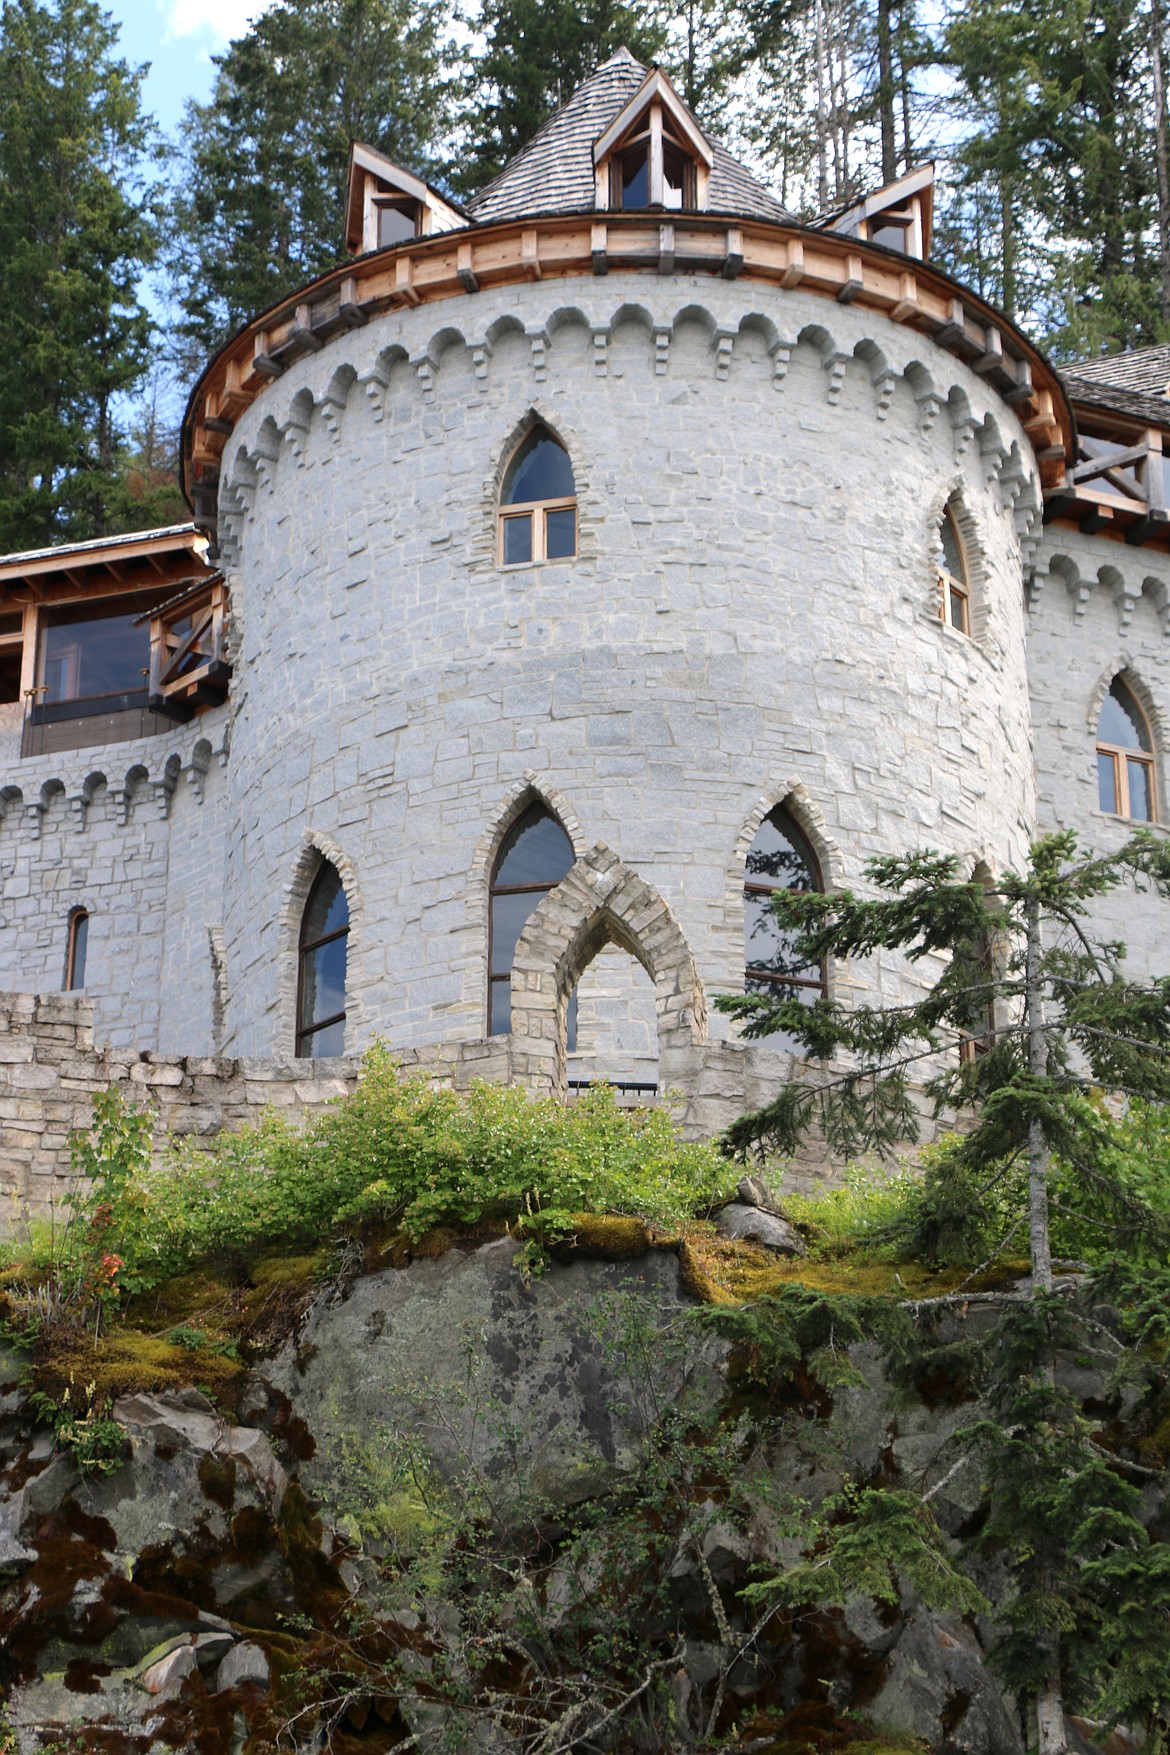 Built as an authentic castle, Castle Von Frandsen sits perched on a cliff on the banks of Lake Pend Oreille.